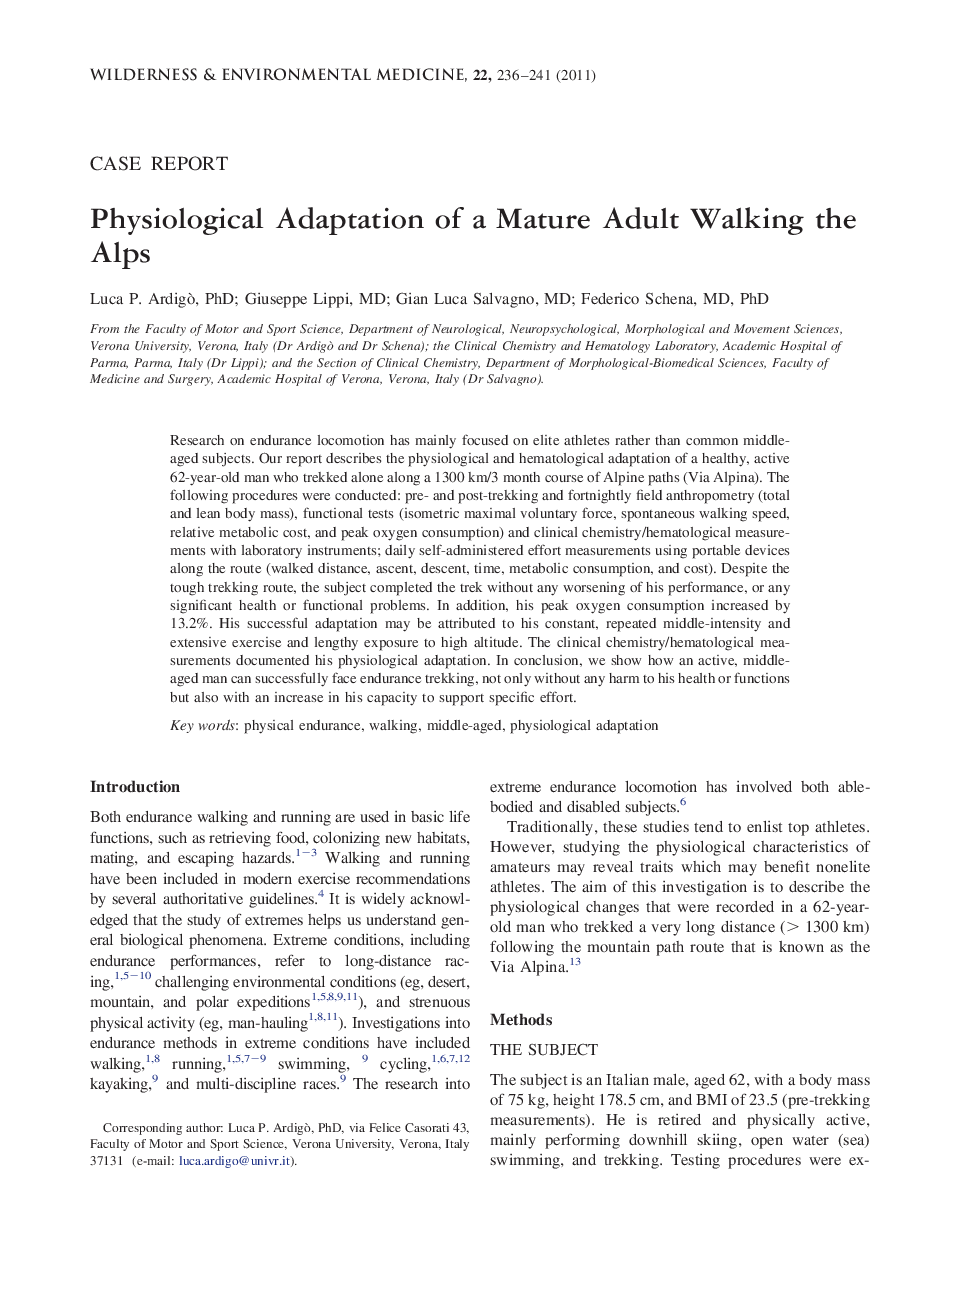 Physiological Adaptation of a Mature Adult Walking the Alps